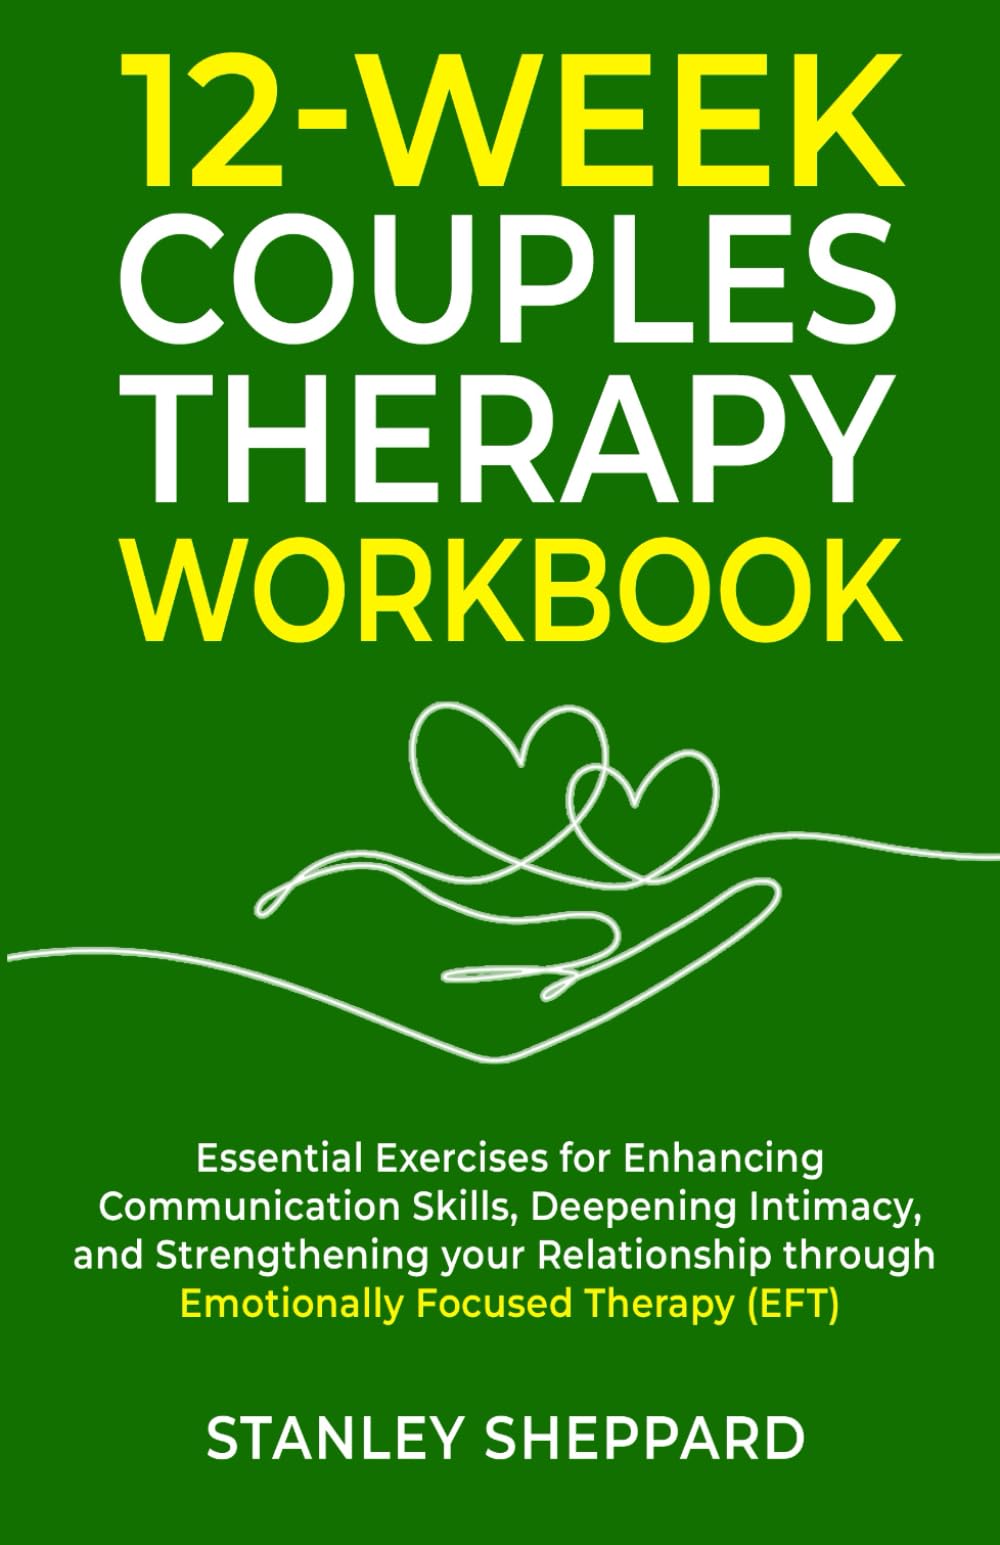 12-Week Couples Therapy Workbook: Essential Exercises for Enhancing Communication Skills, Deepening Intimacy, and Strengthening Your Relationship ... Focused Therapy (EFT) (Relationship Books)